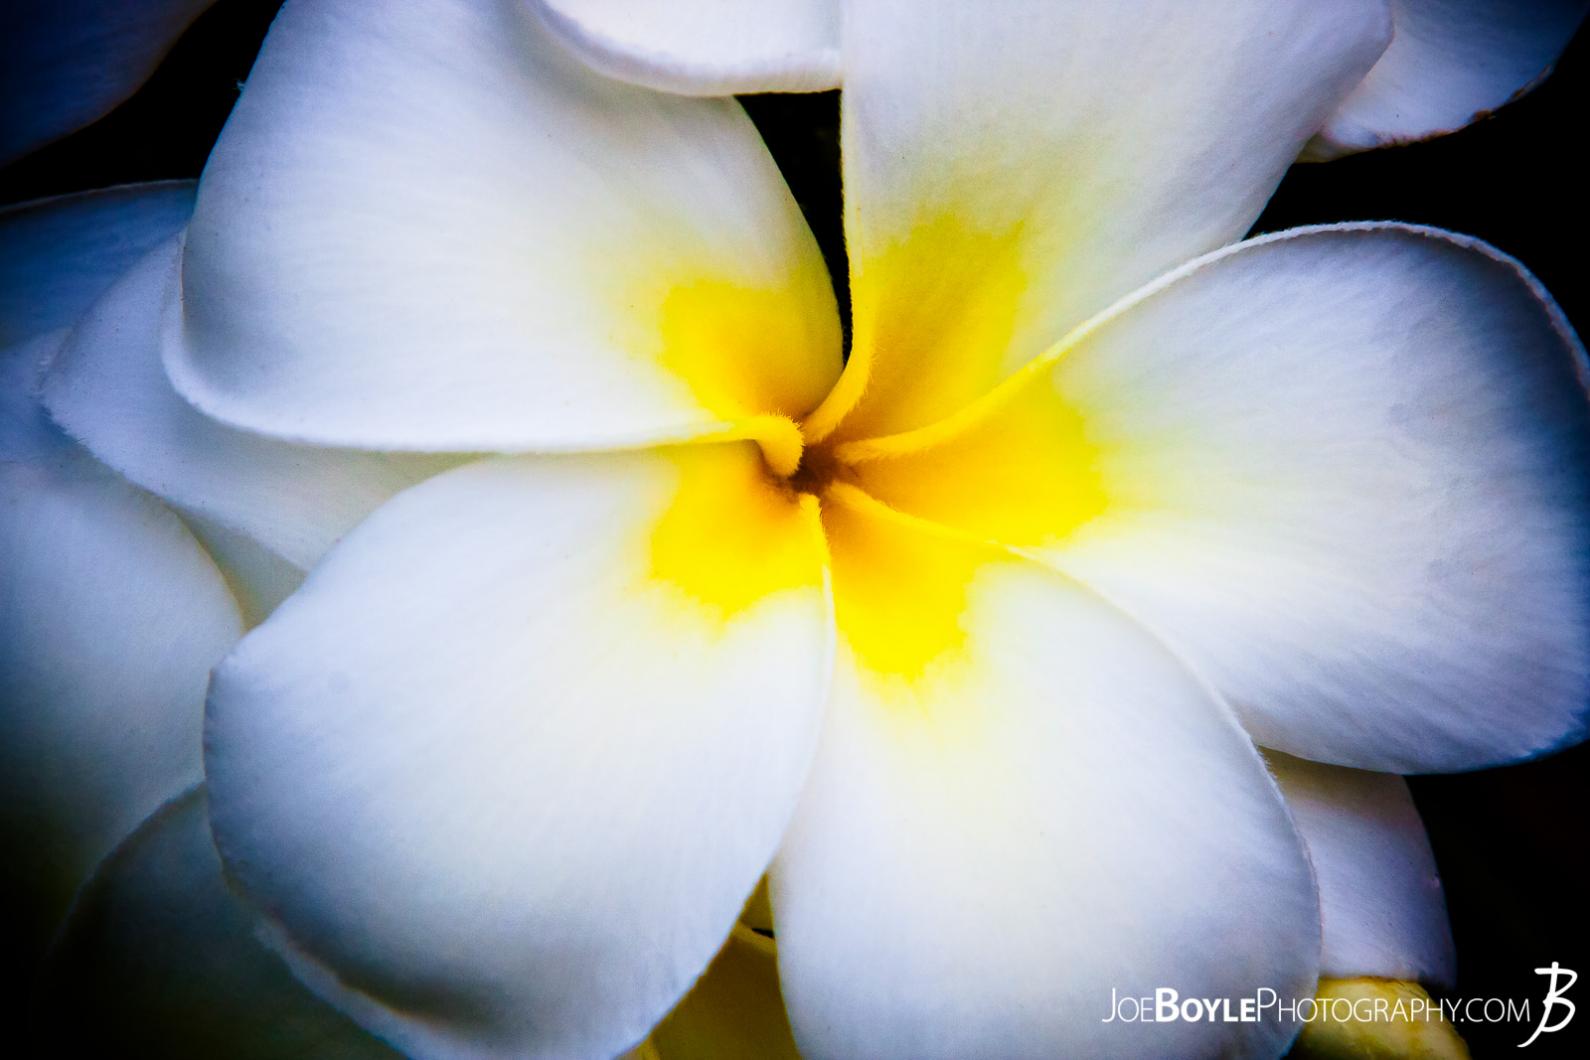 While travelling to, in and around Hawaii I was able to capture some really gorgeous and beautiful flowers! This plumeria being one of them!